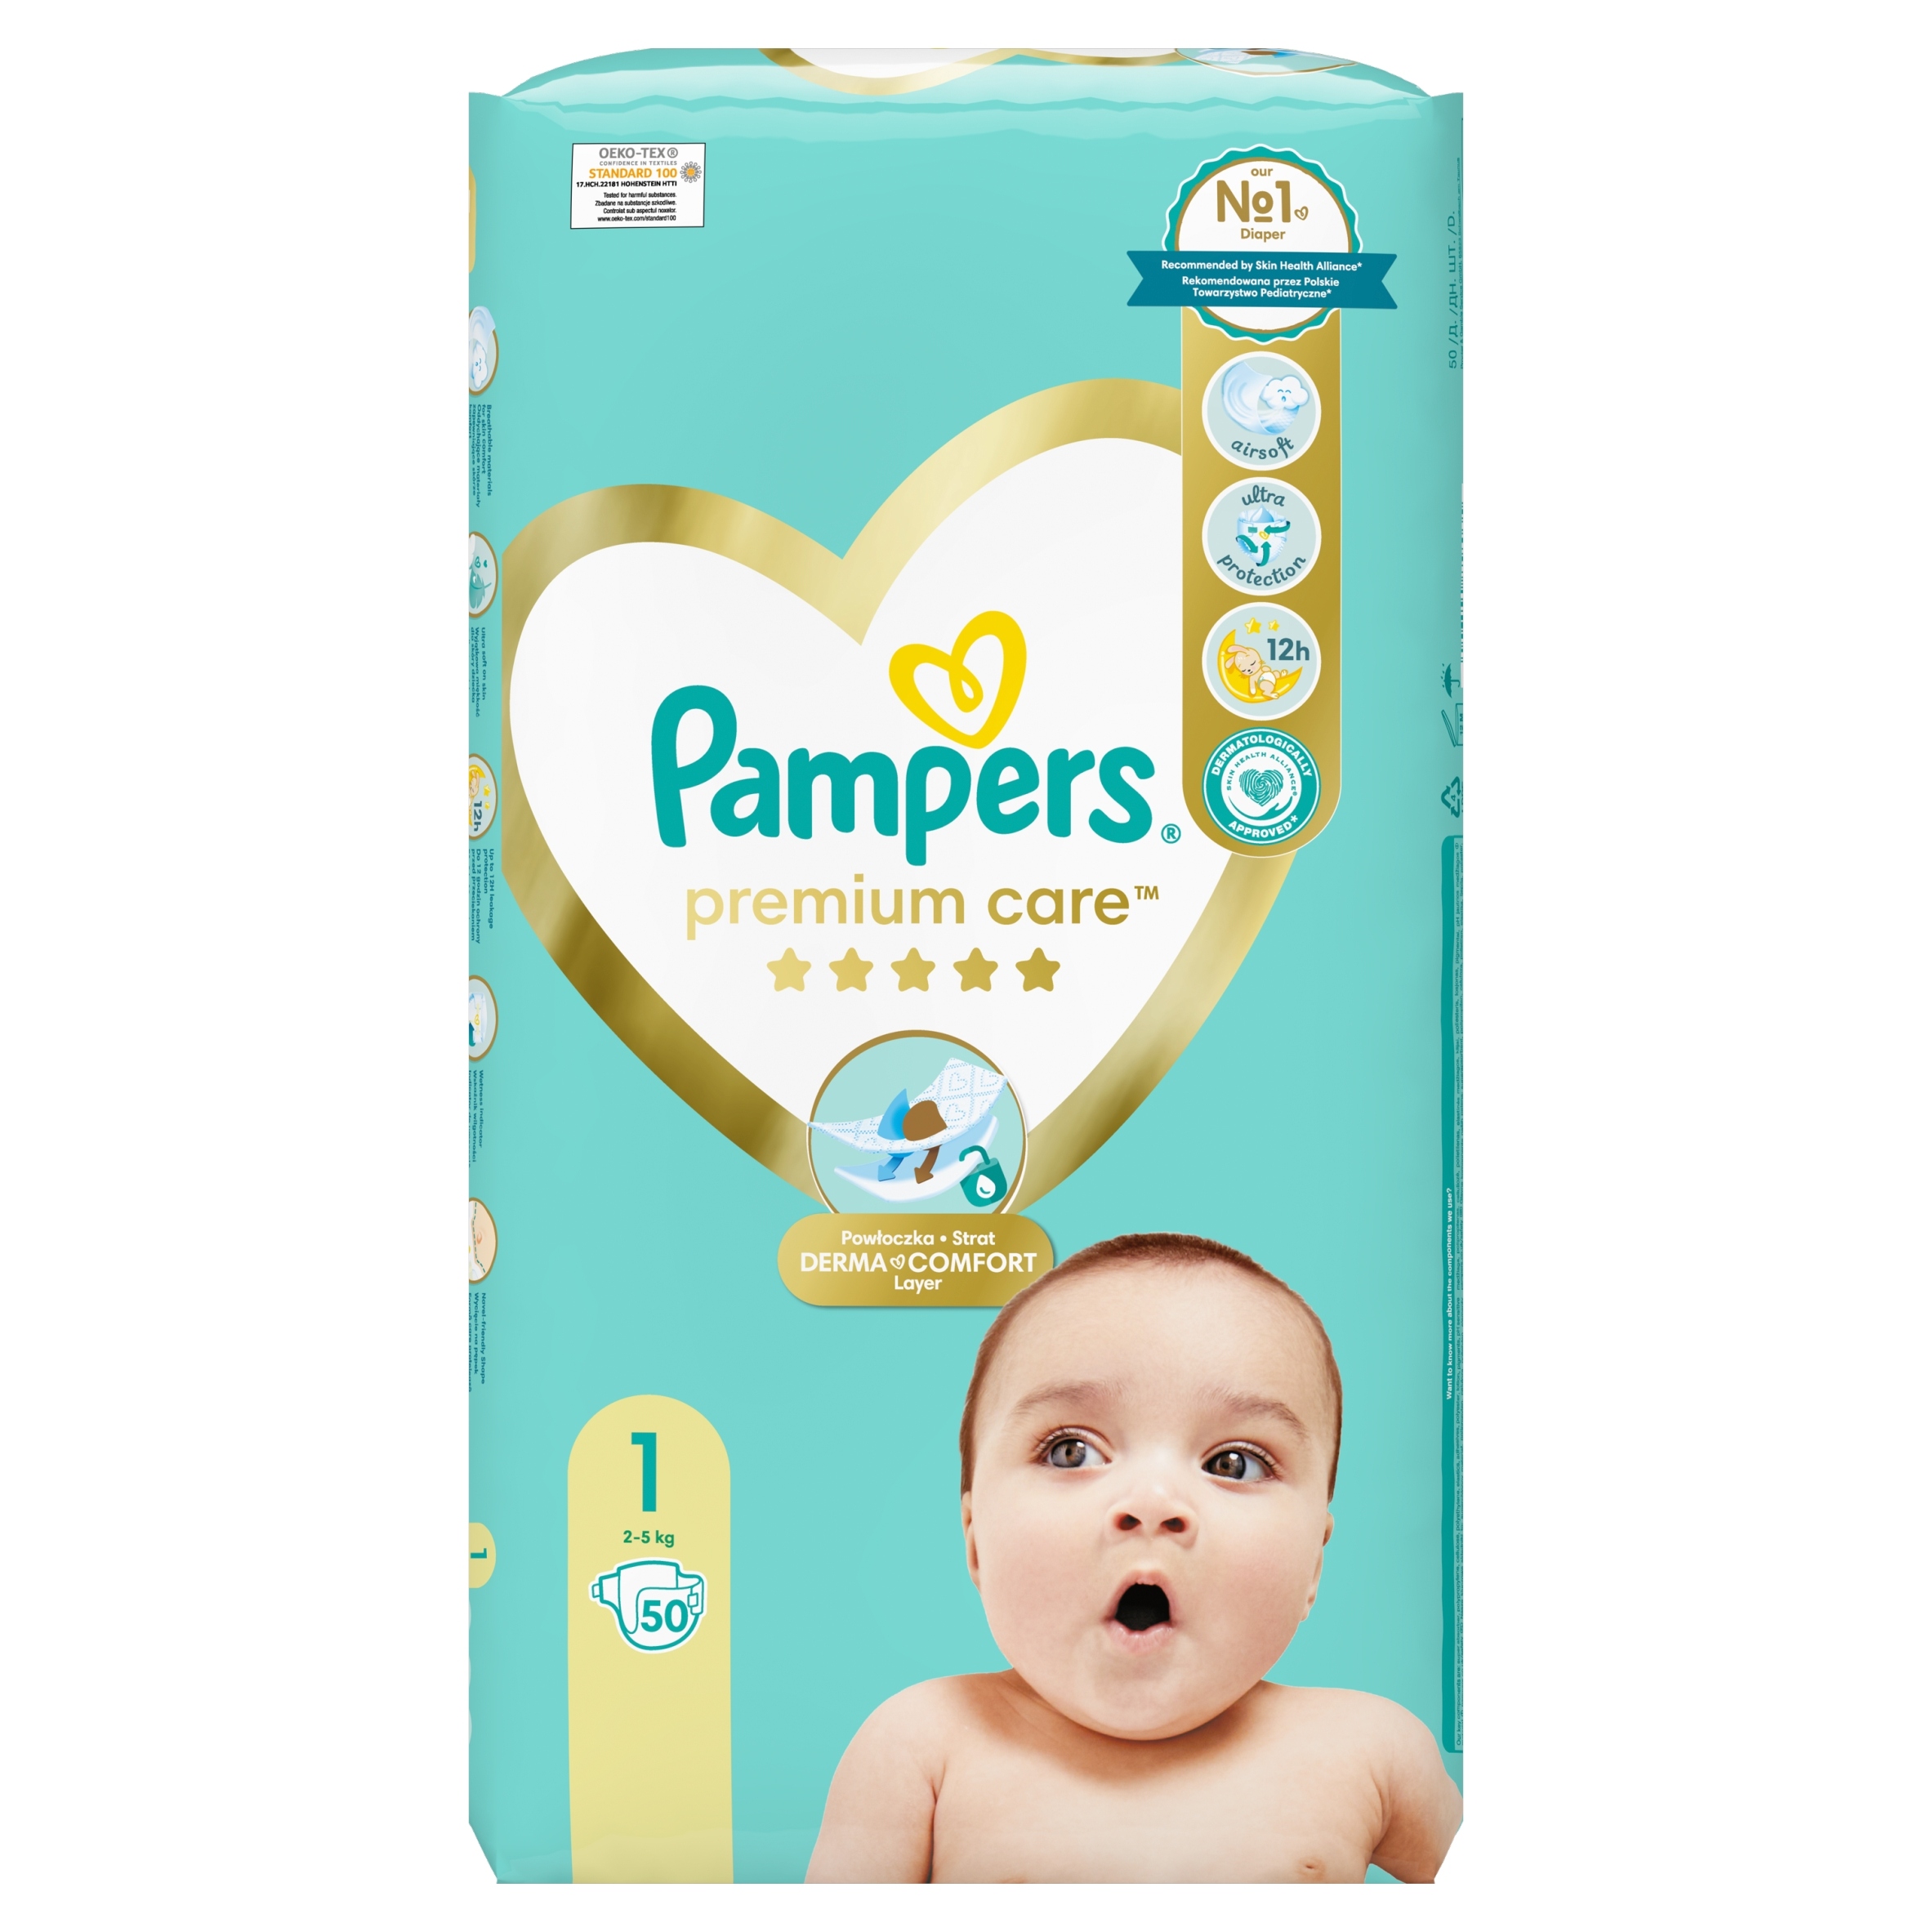 pampers premium care rozmiary pieluch